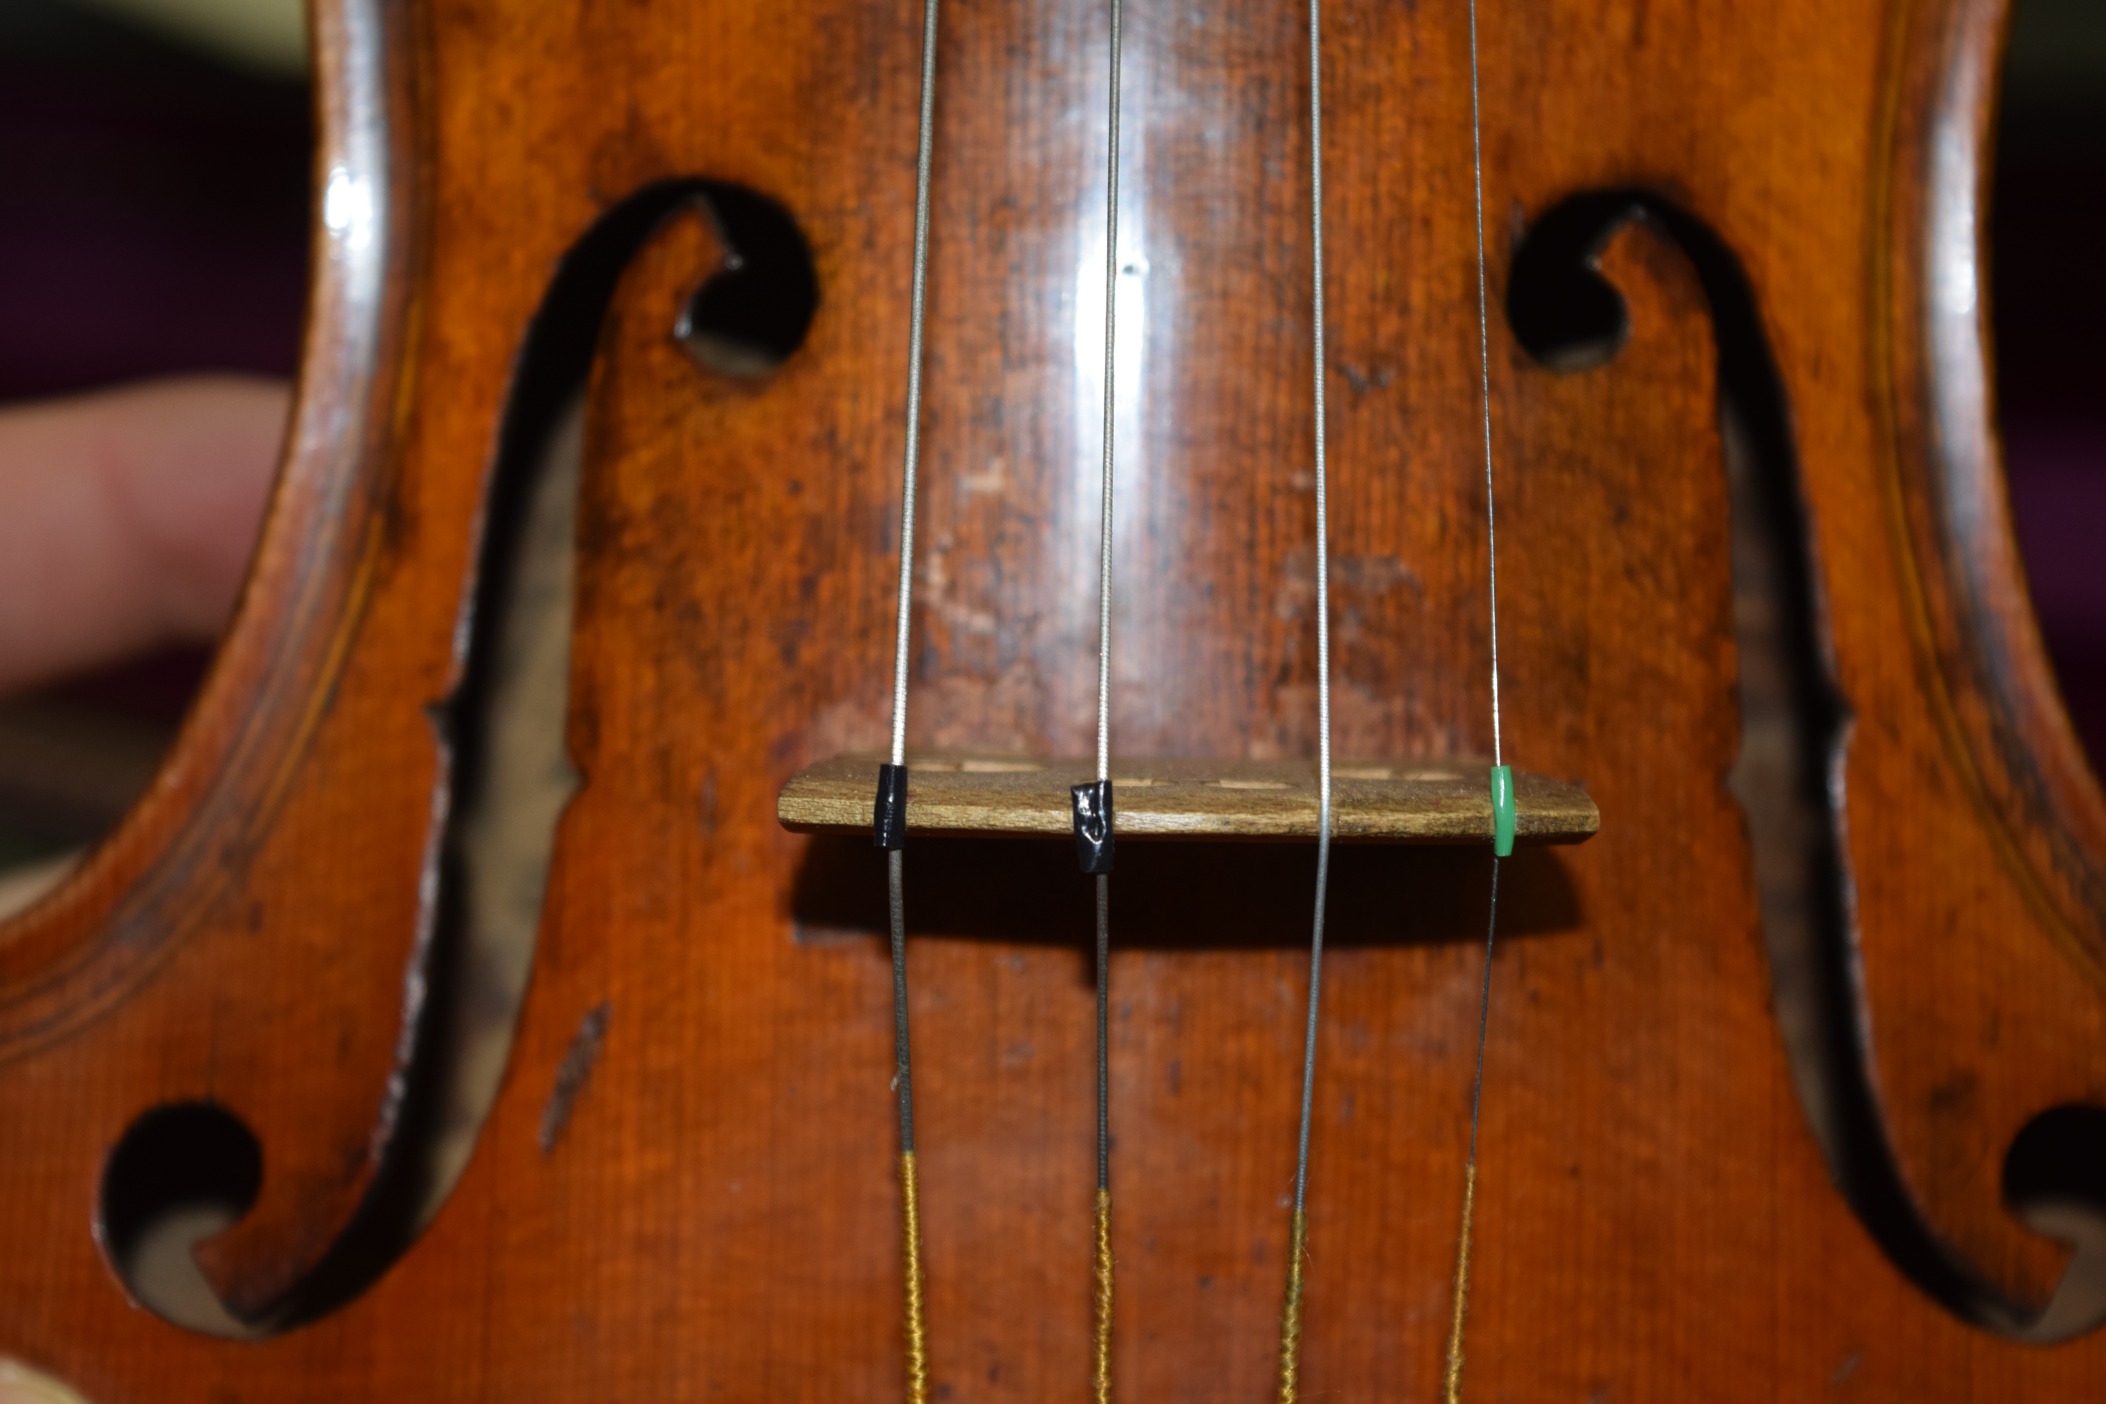 A GOOD ANTIQUE VIOLIN, bearing interior label "Gionvam Paulo Maggini, 1698", together with a bow. - Image 6 of 9